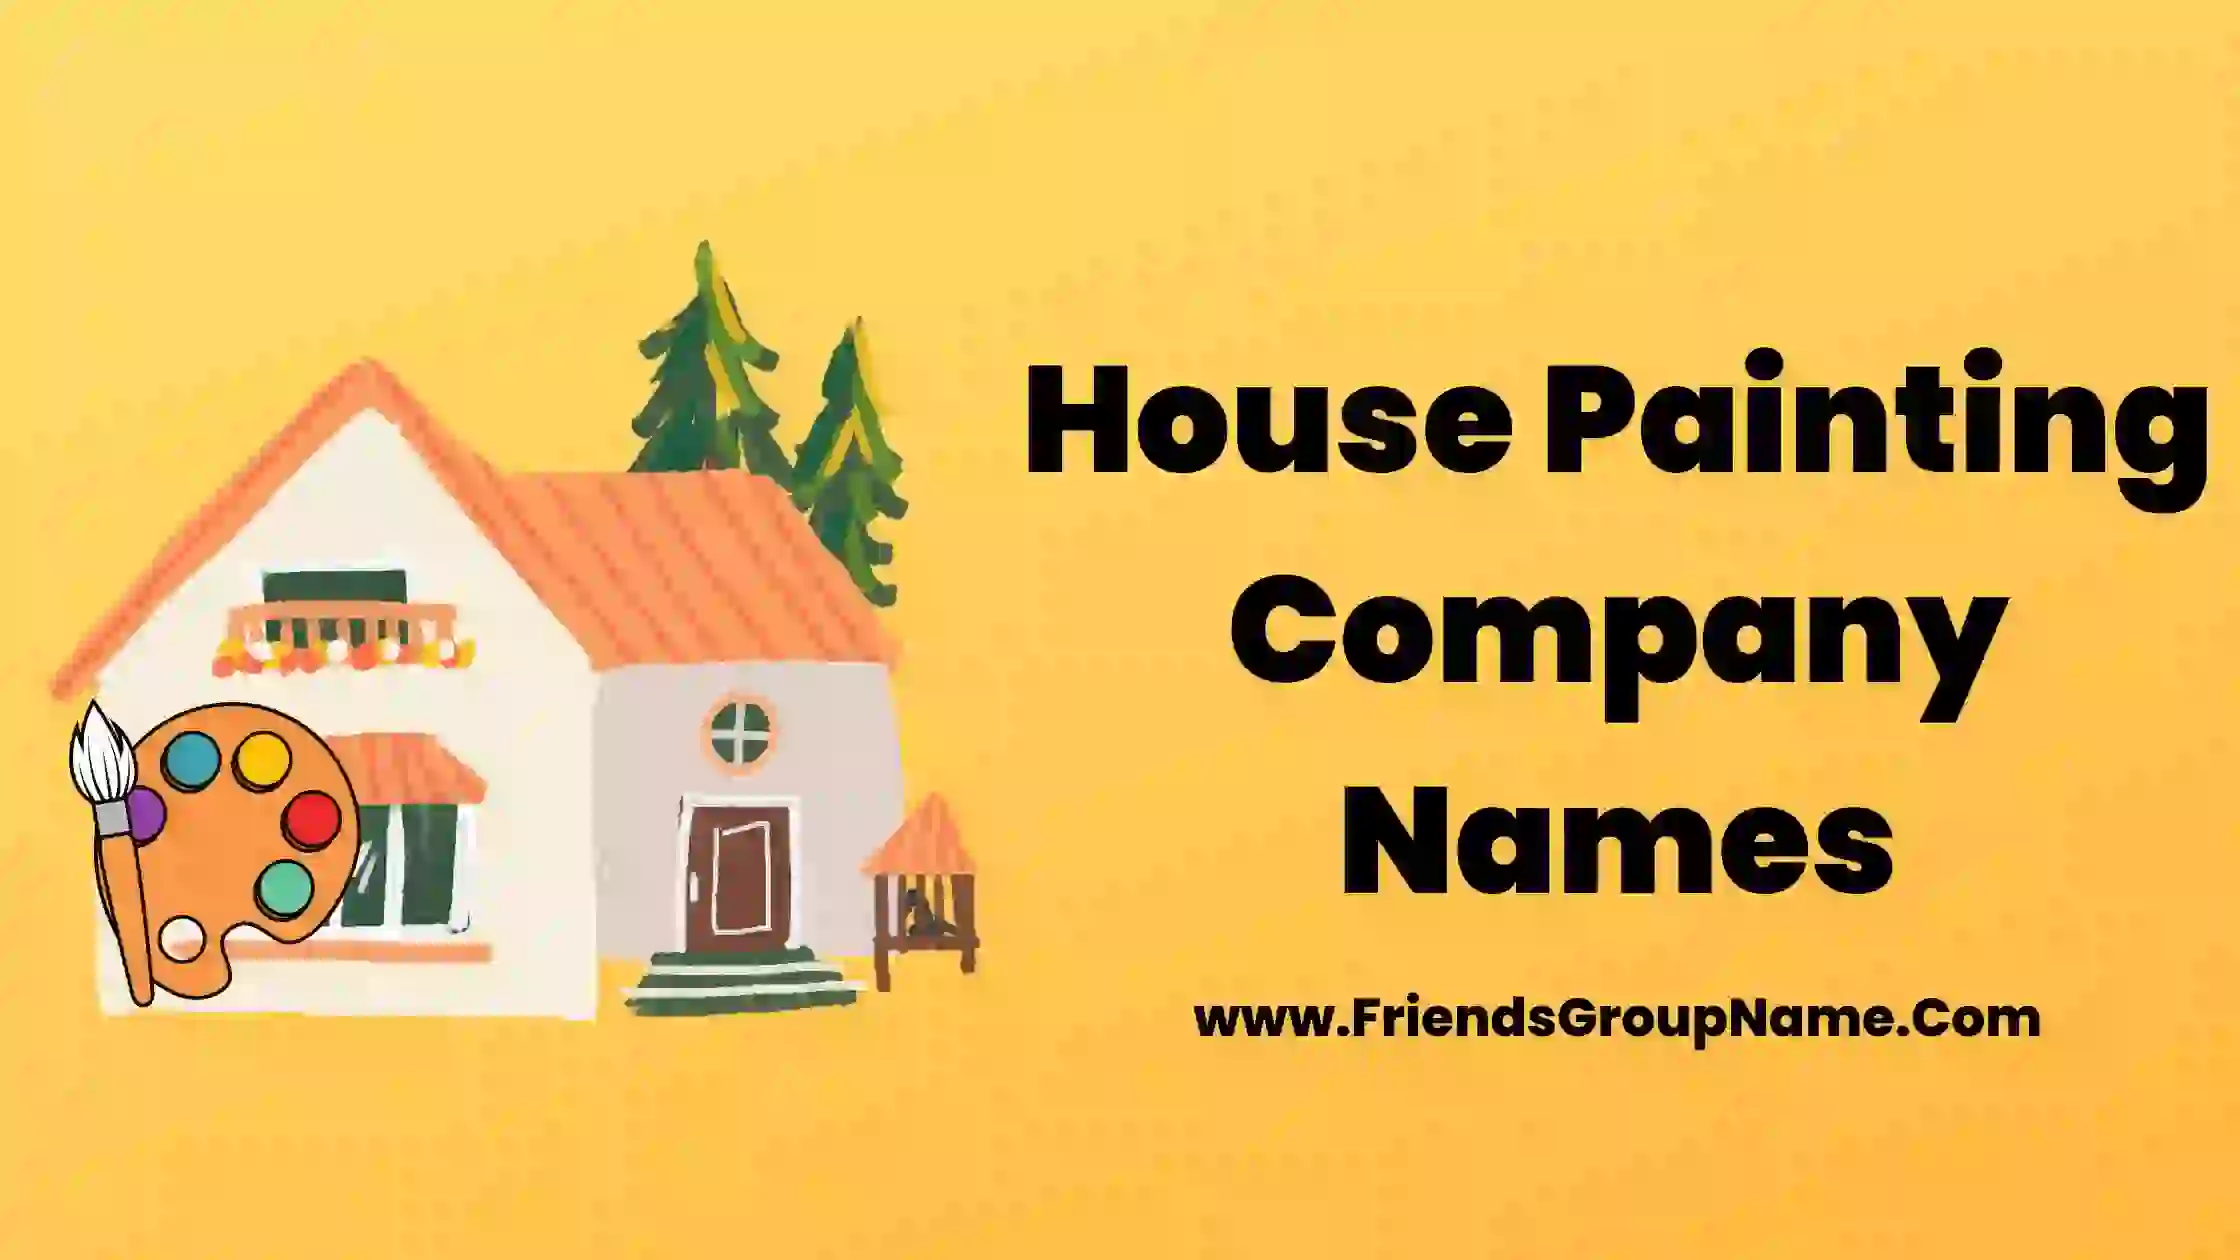 House Painting Company Names